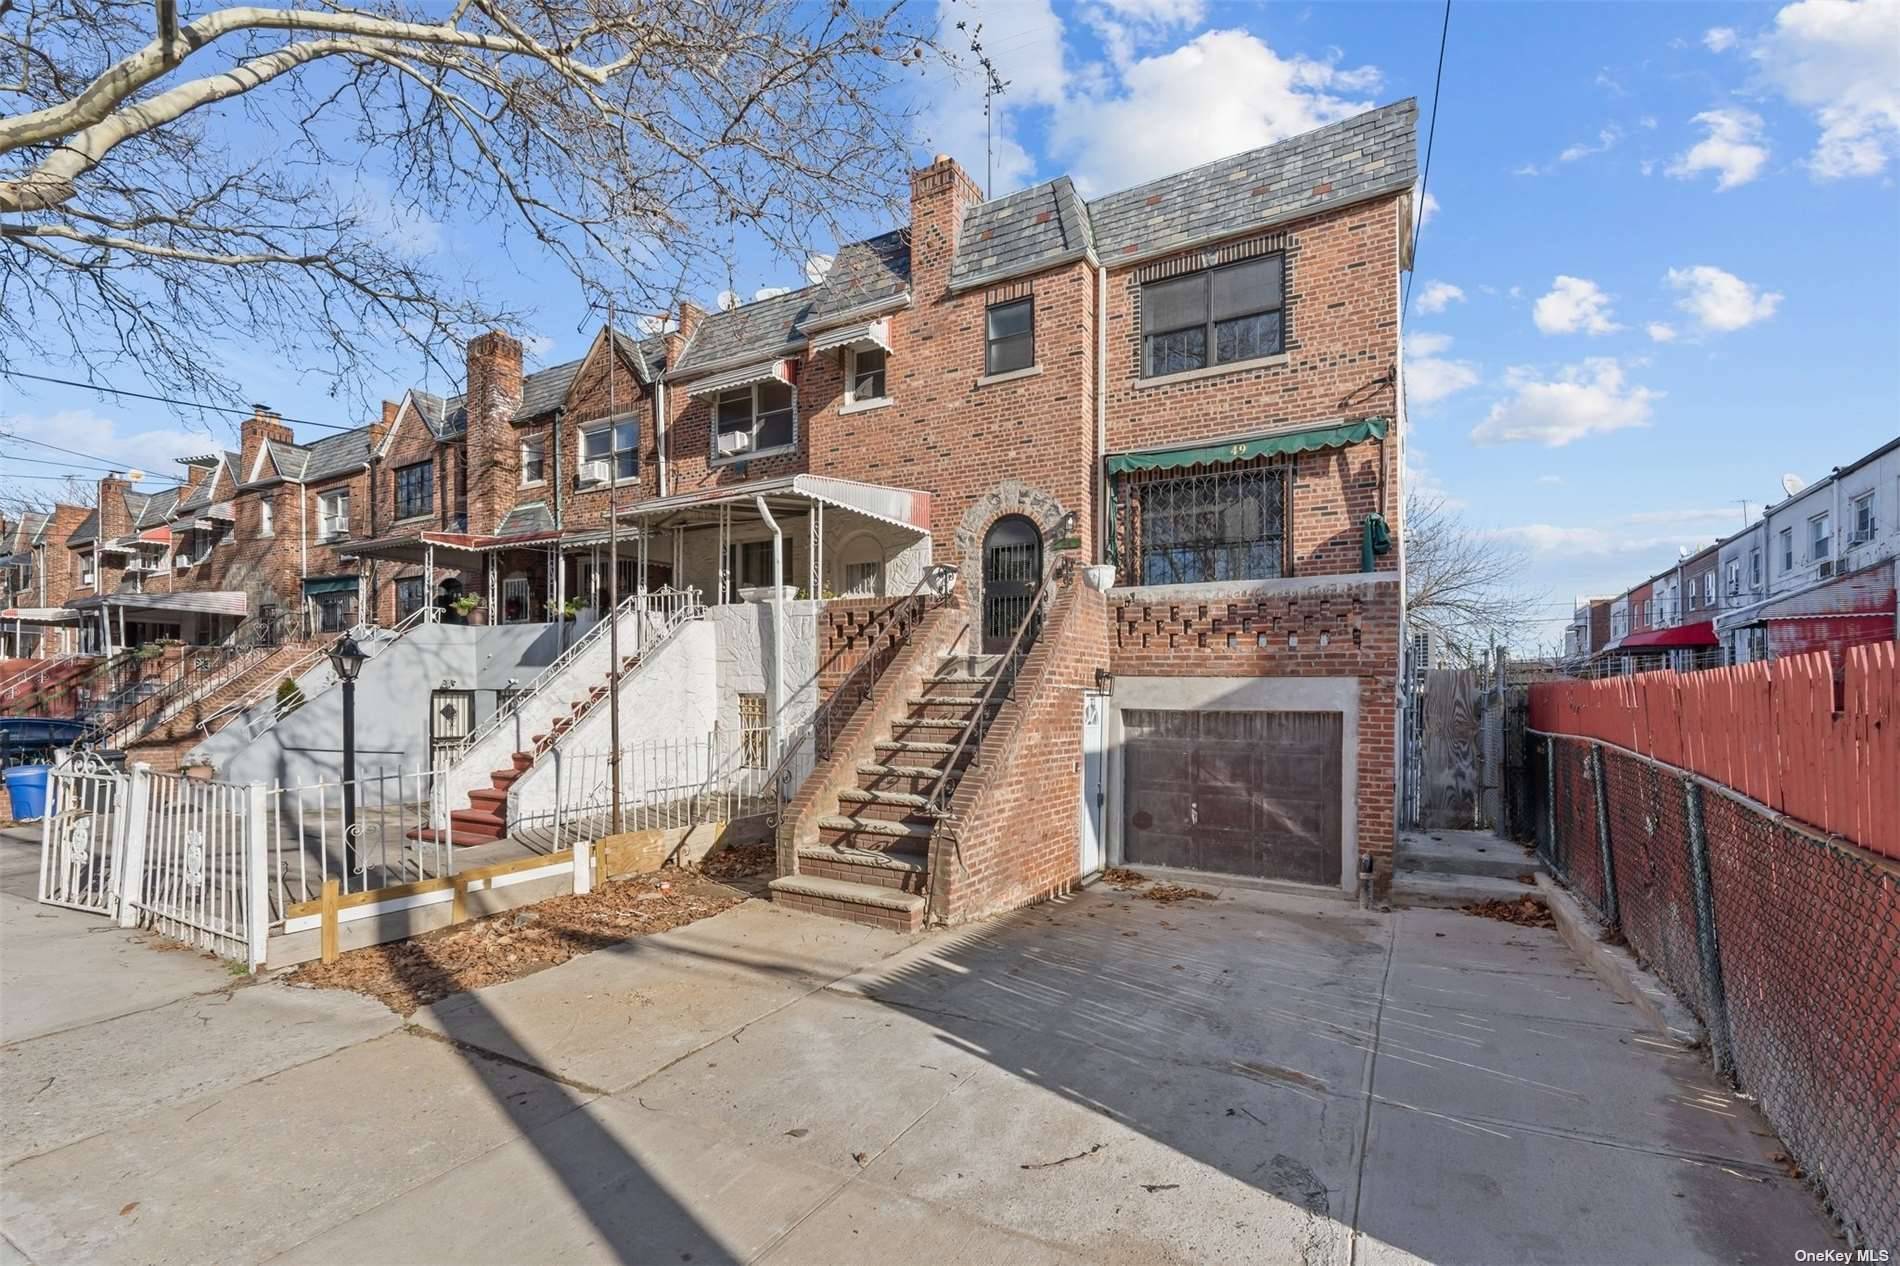 Brooklyn's BEST kept secret this fully renovated two family house offers luxury, plenty of space, and updated amenities.